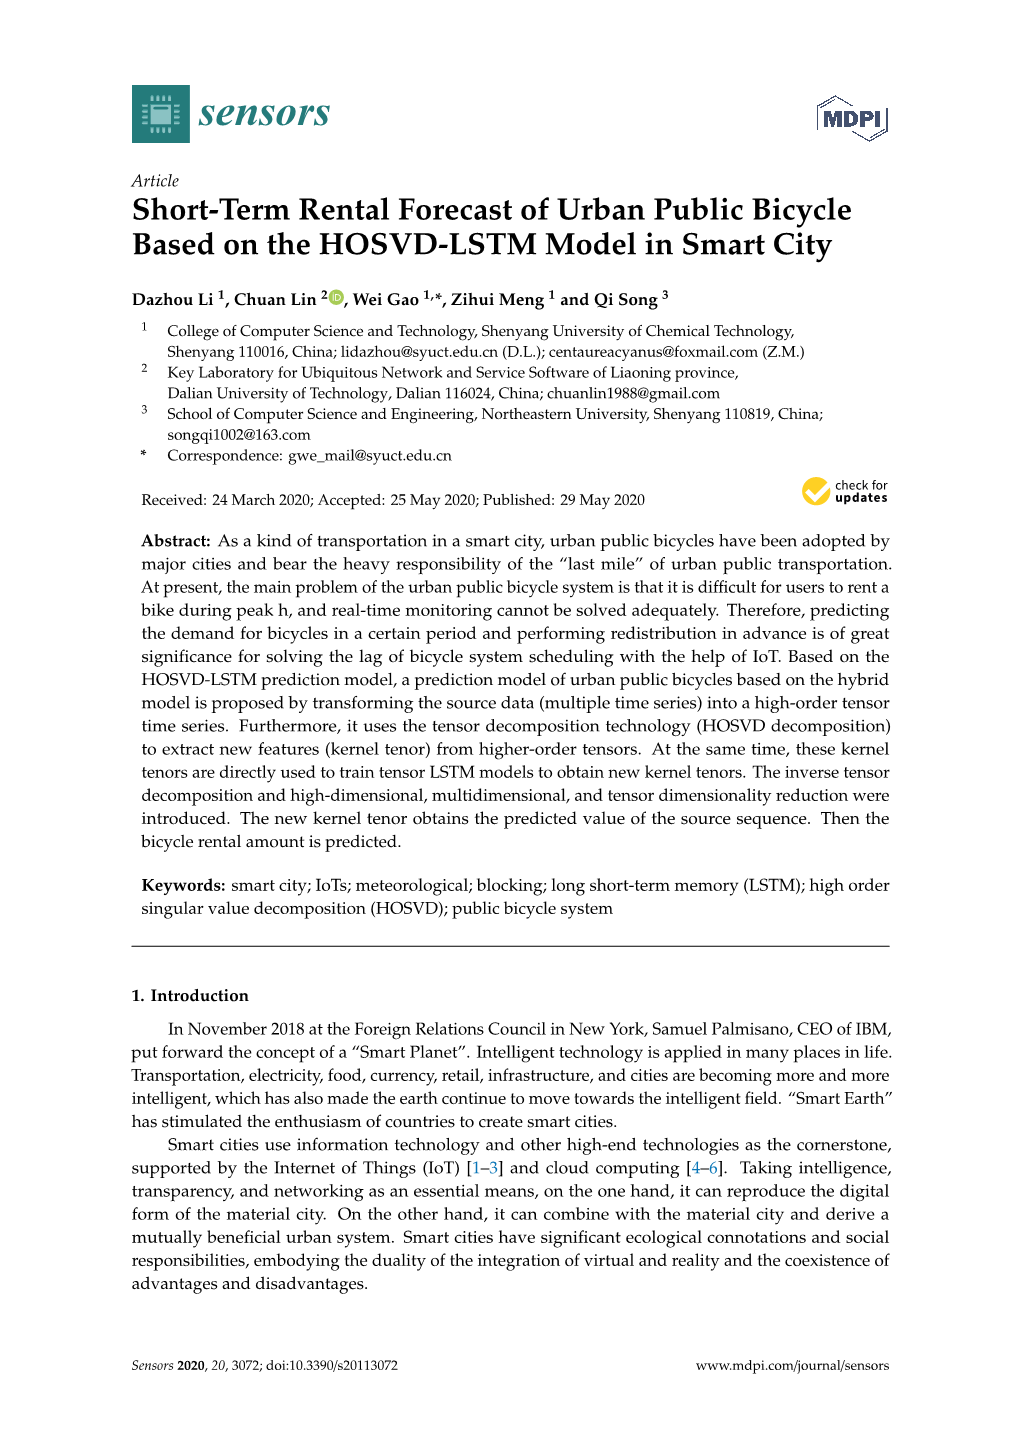 Short-Term Rental Forecast of Urban Public Bicycle Based on the HOSVD-LSTM Model in Smart City